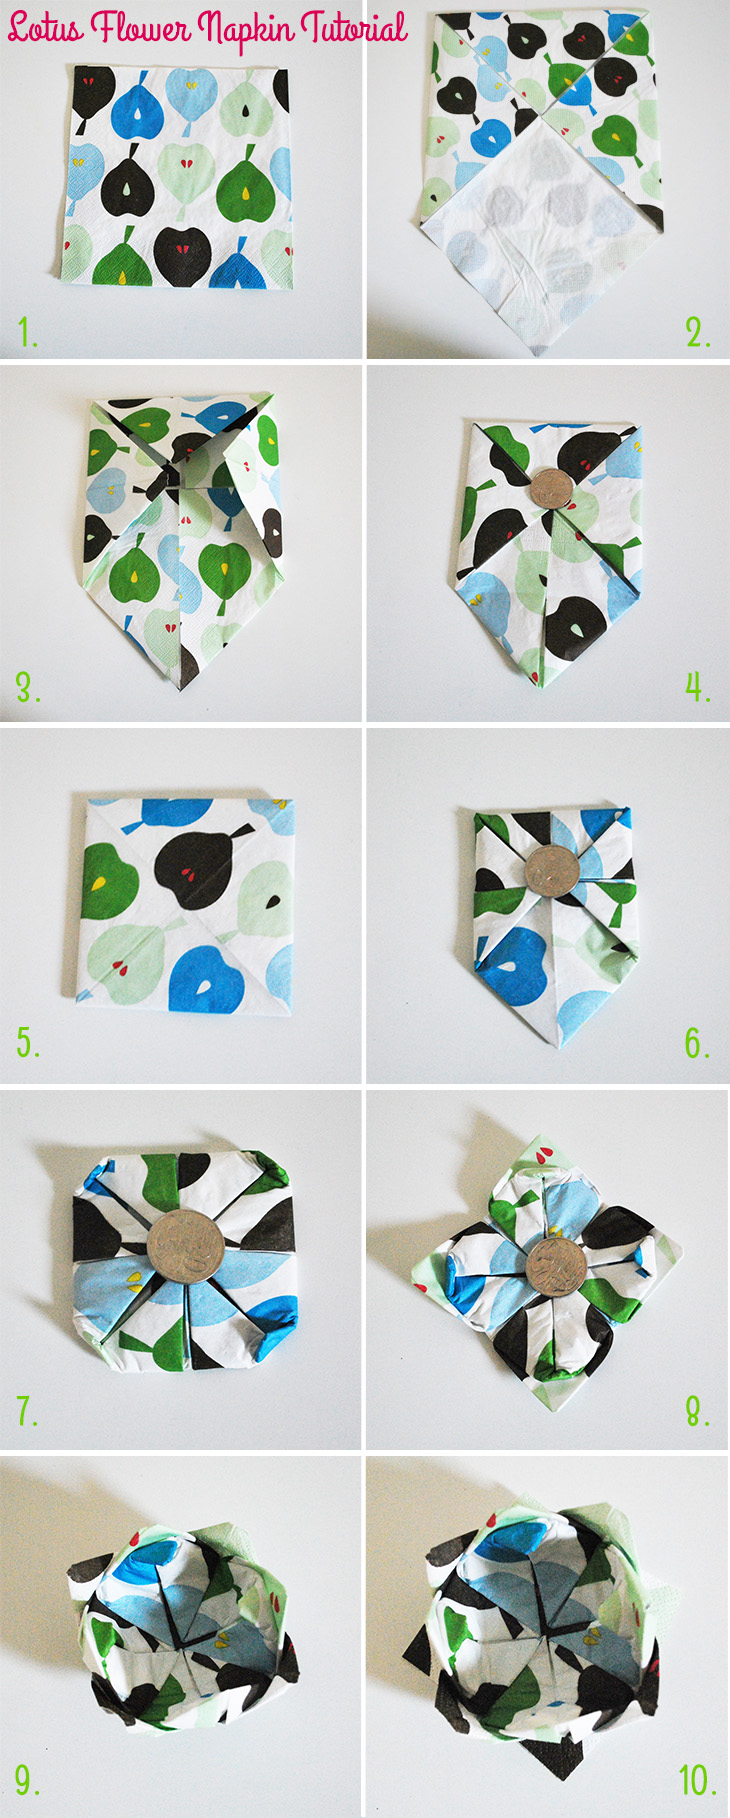 Lotus Flower Napkin Tutorial on Style for a Happy Home